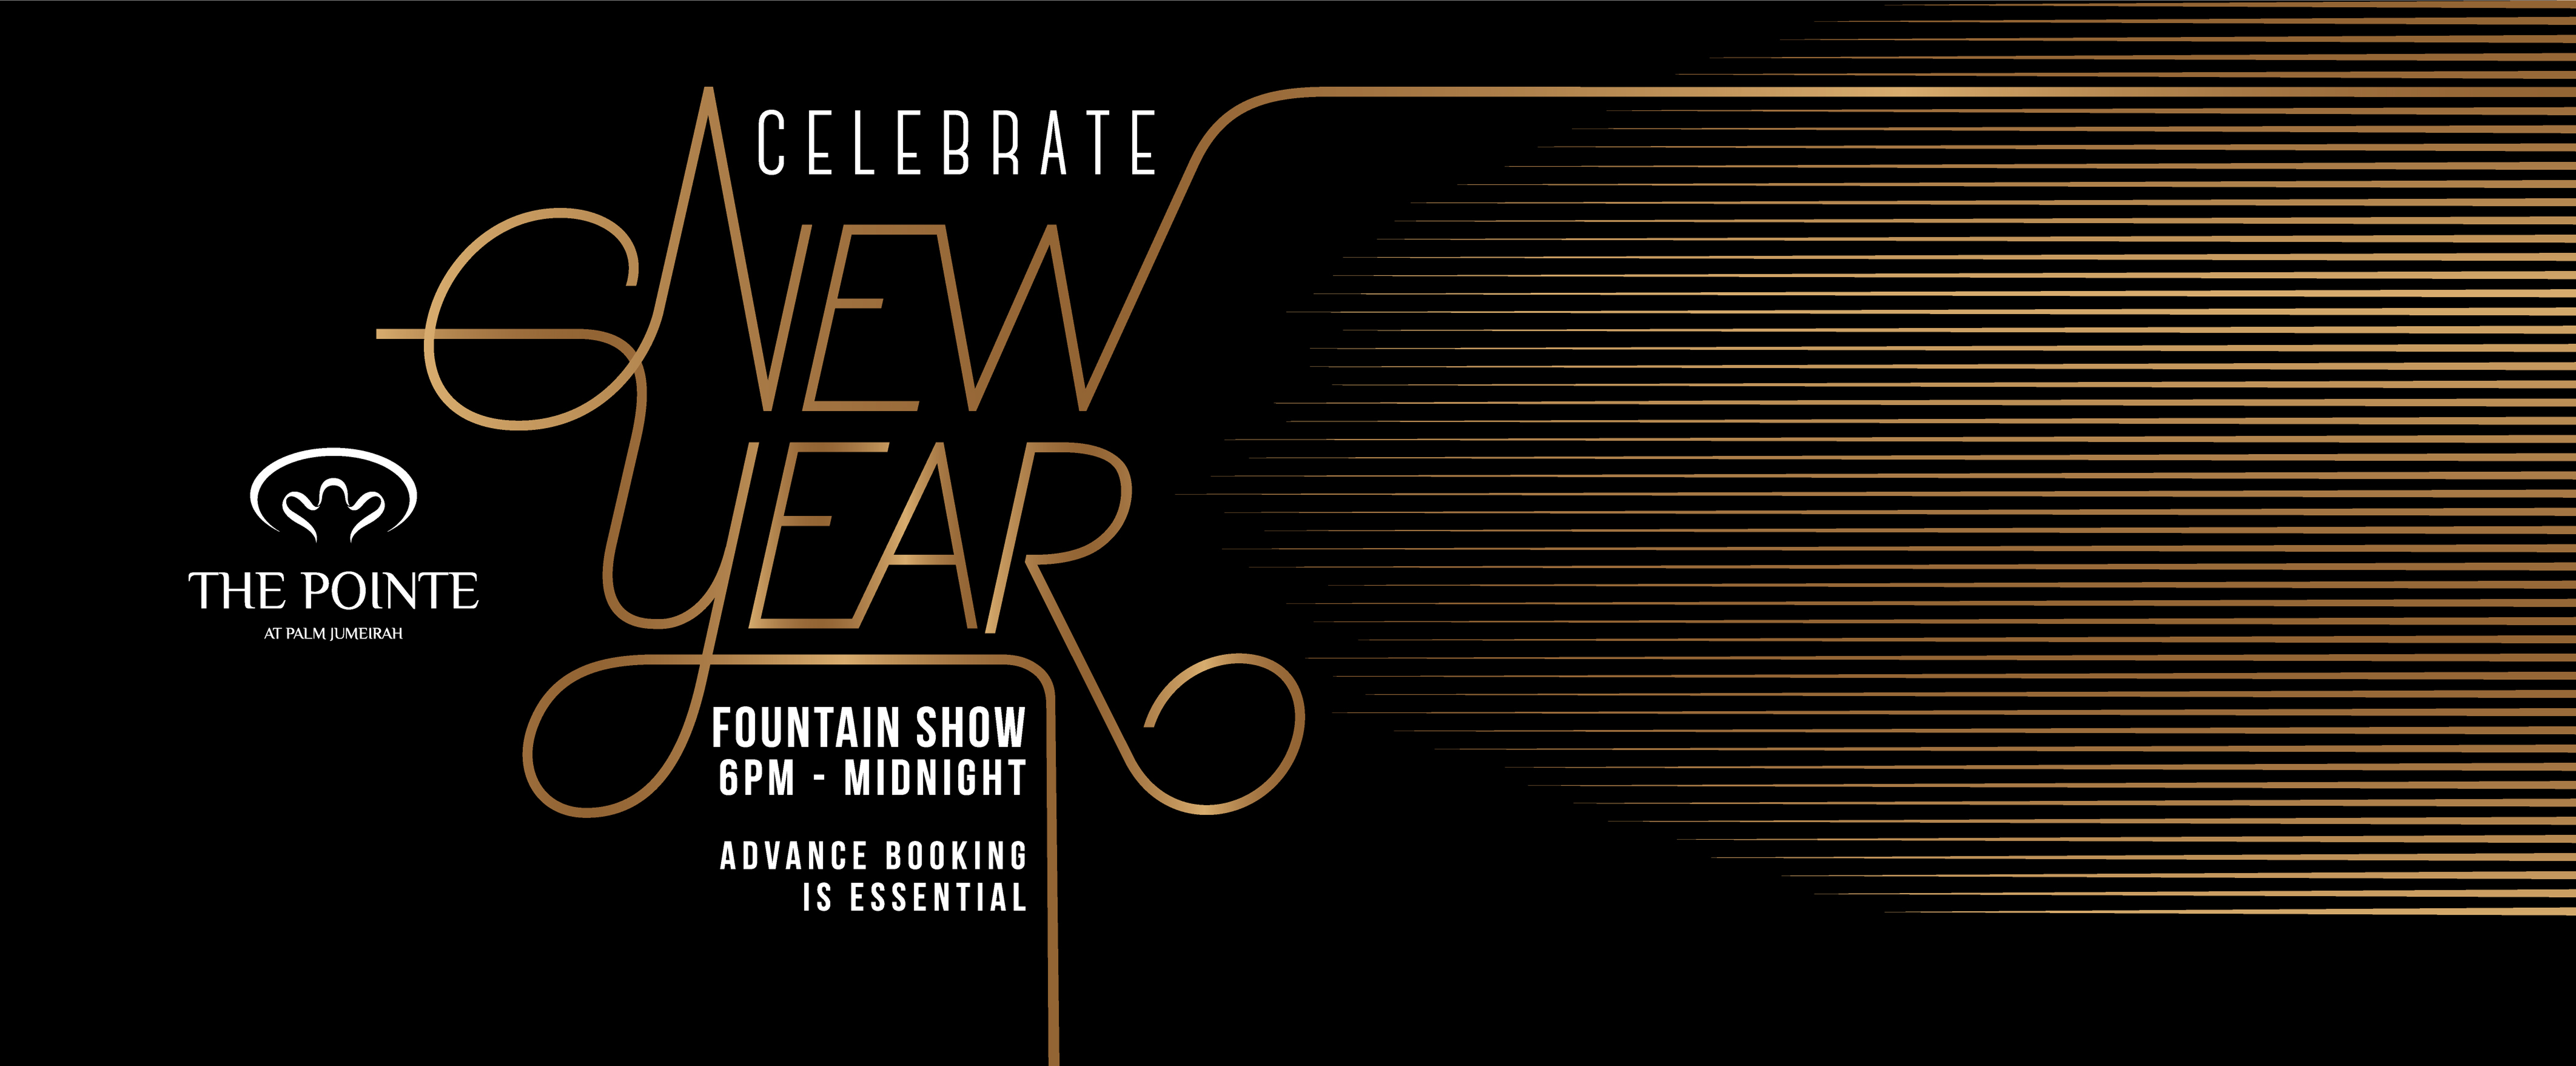 Celebrate New Year's Eve at the Pointe 